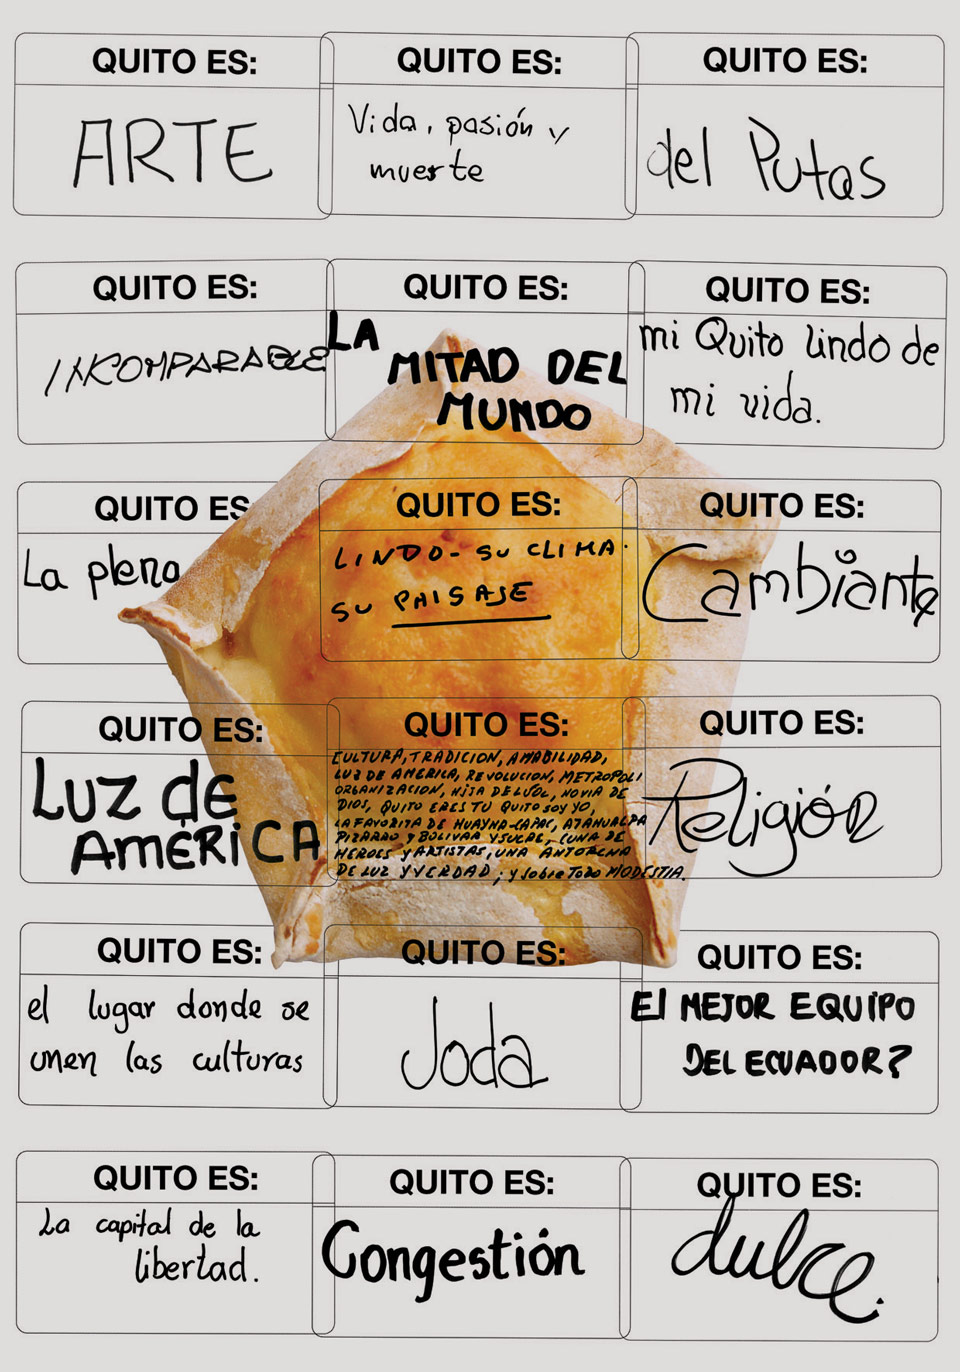 quitoes-poster